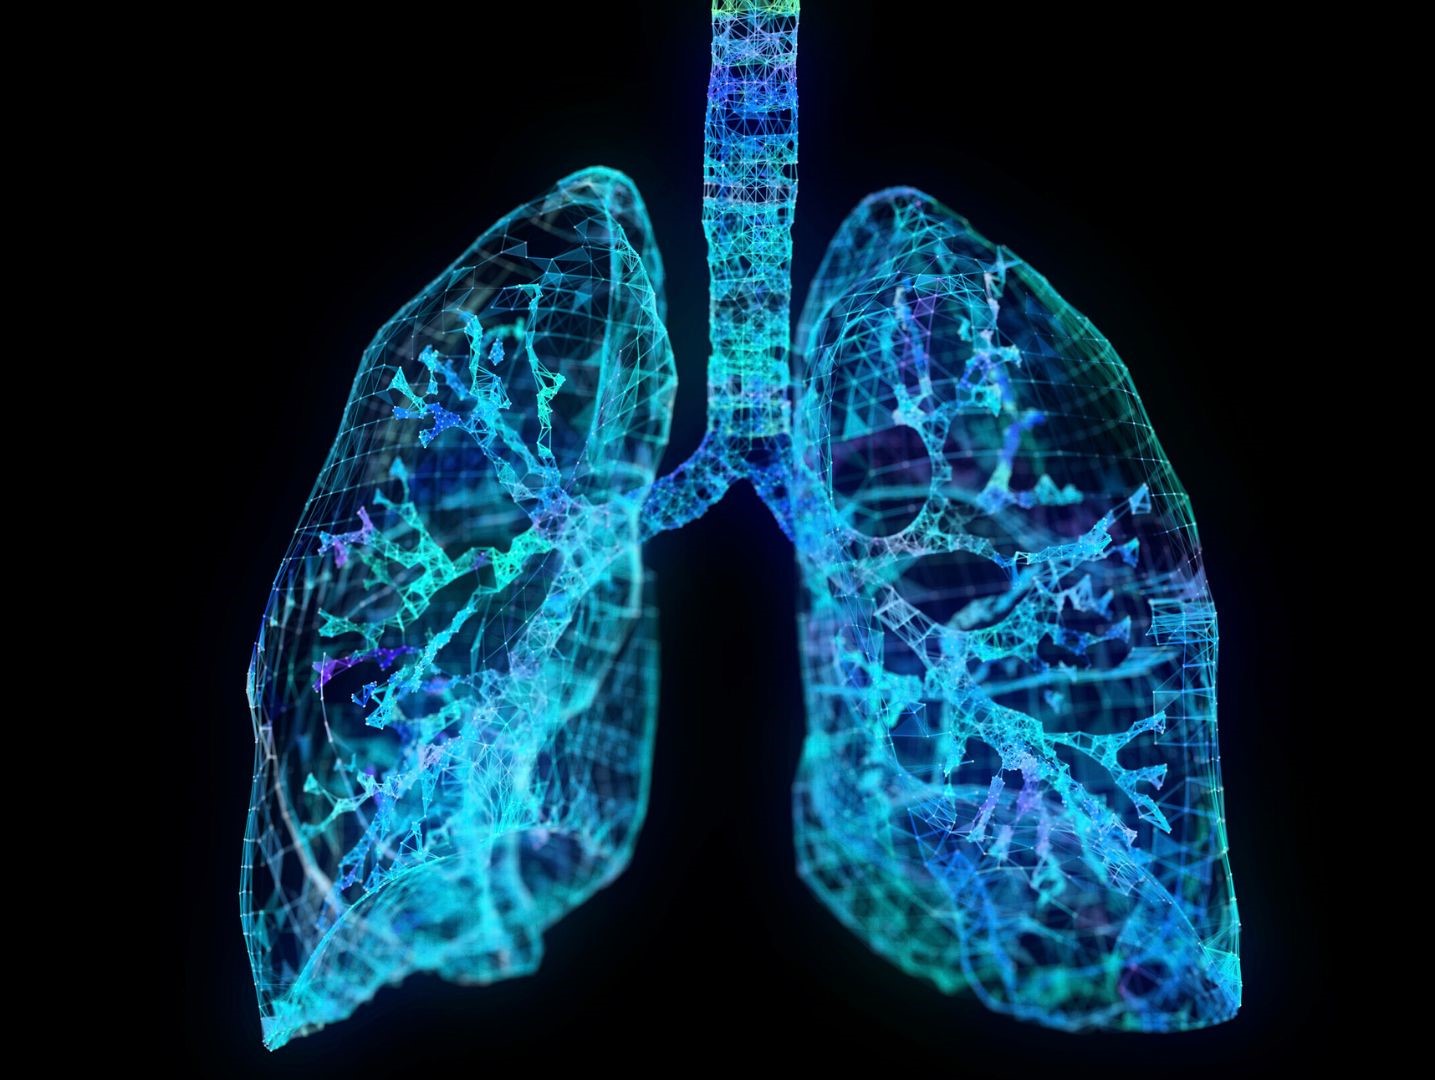 Transforming asthma care through access to diagnostics and innovative treatments